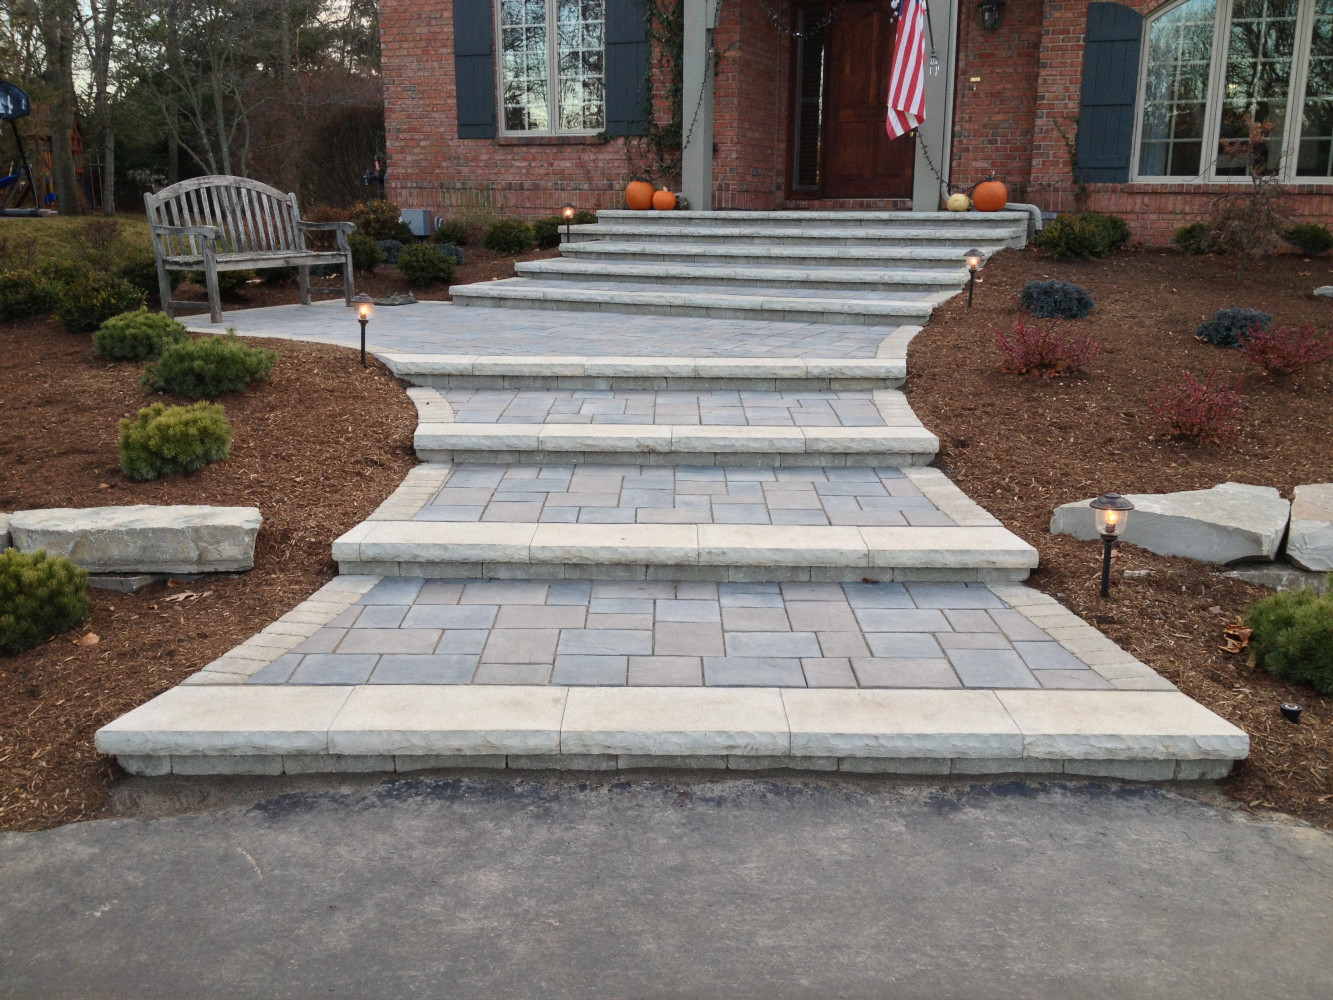 This new front entrance has high appeal.  Not to mention a heated system for snow melt.